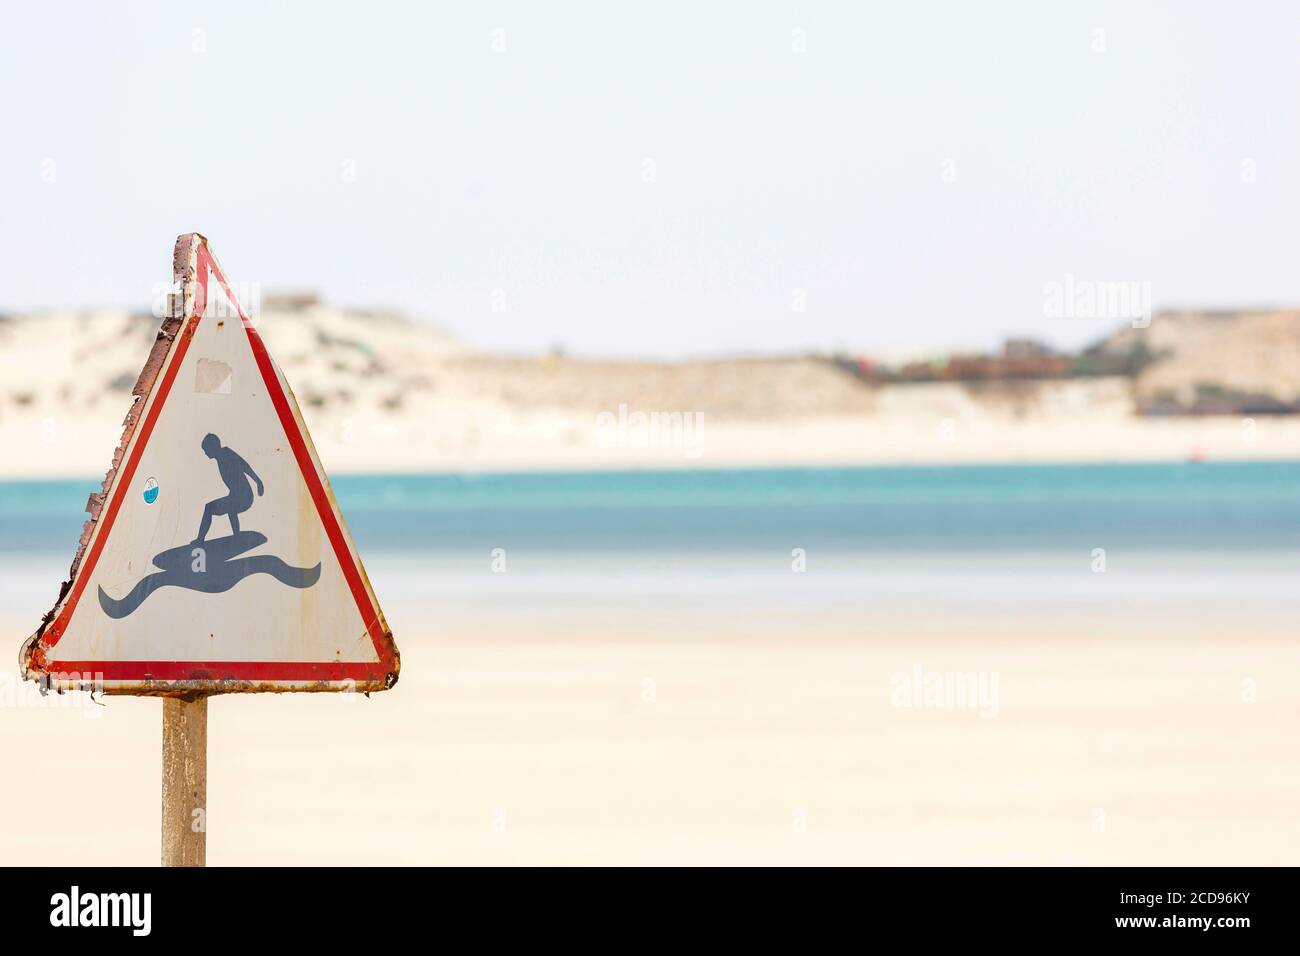 Marocco, Oued Ed-Dahab, Dakhla, road sign representing a surfer on a wave Stock Photo